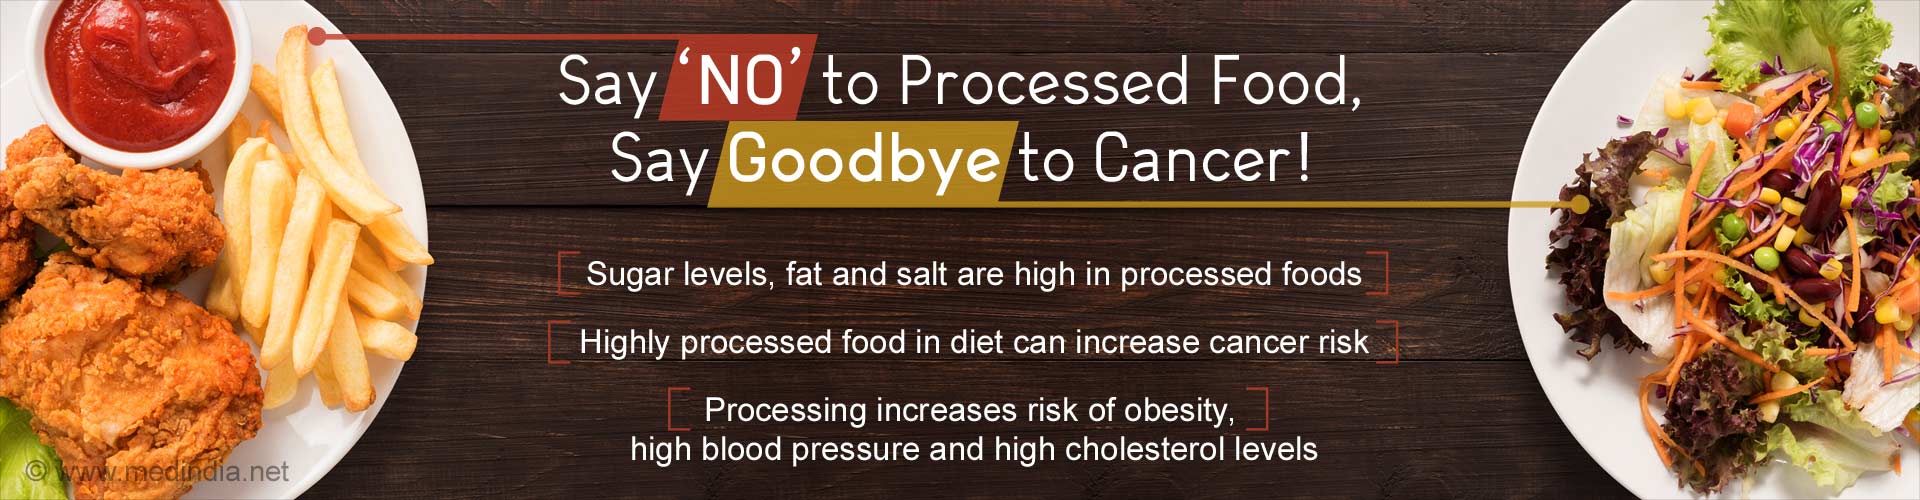 Say 'no' to Processed Food, Say Goodbye to Cancer!
- Sugar levels, fat and salt are high in processed foods
- Highly processed food in diet can increase cancer risk
- Processing increases risk of obesity, high blood pressure and high cholesterol levels